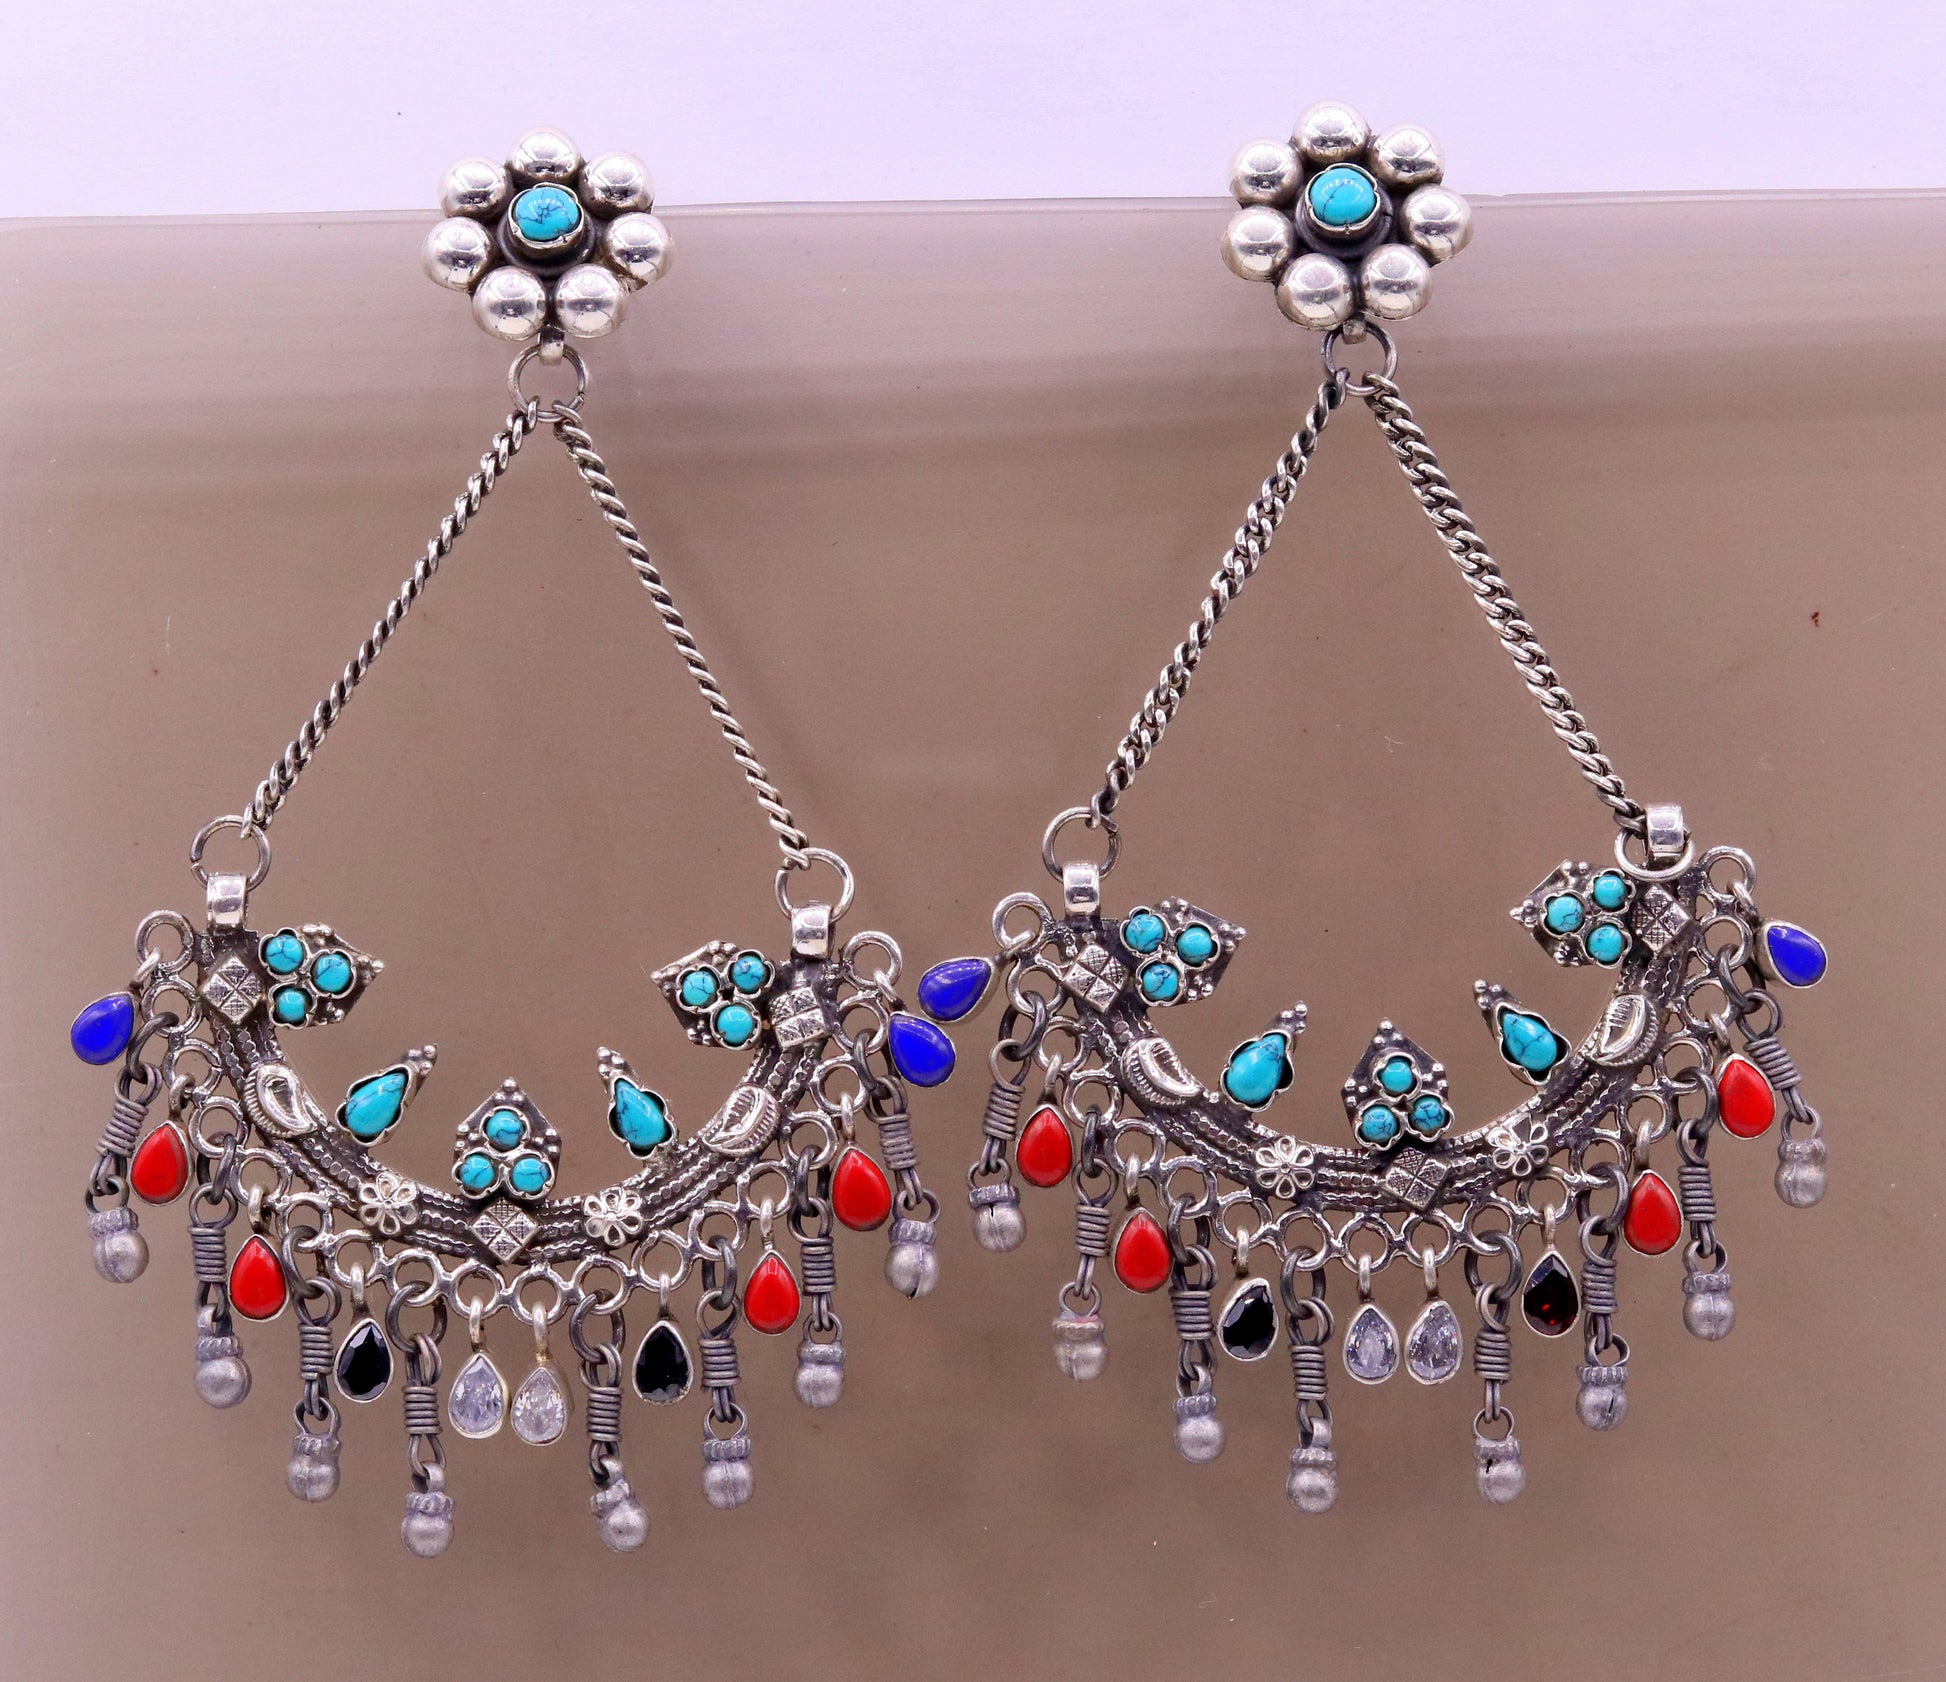 925 sterling silver handmade turquoise and coral stone fabulous long charm earring stud, drop dangle chandbala chandelier style jewelry s724 - TRIBAL ORNAMENTS